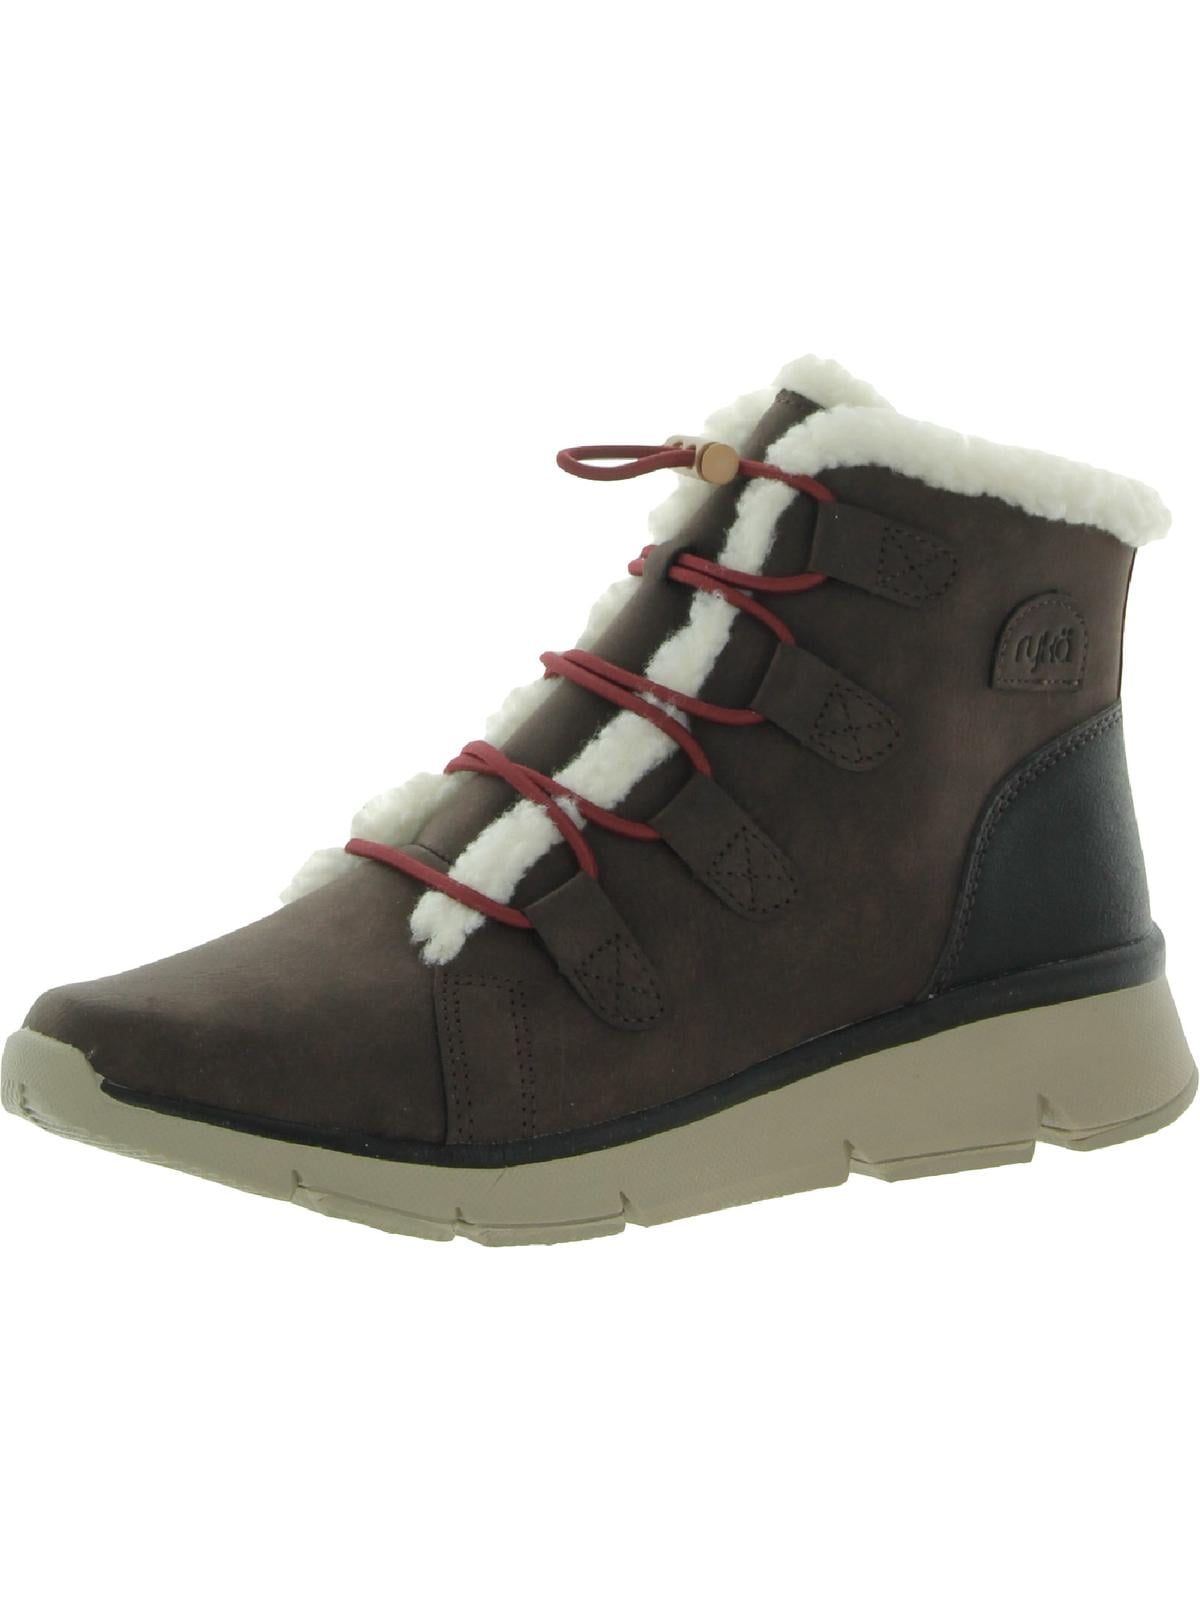 Ryka Womens Chill Out Faux Leather Faux Fur Hiking Boots - Walmart.com